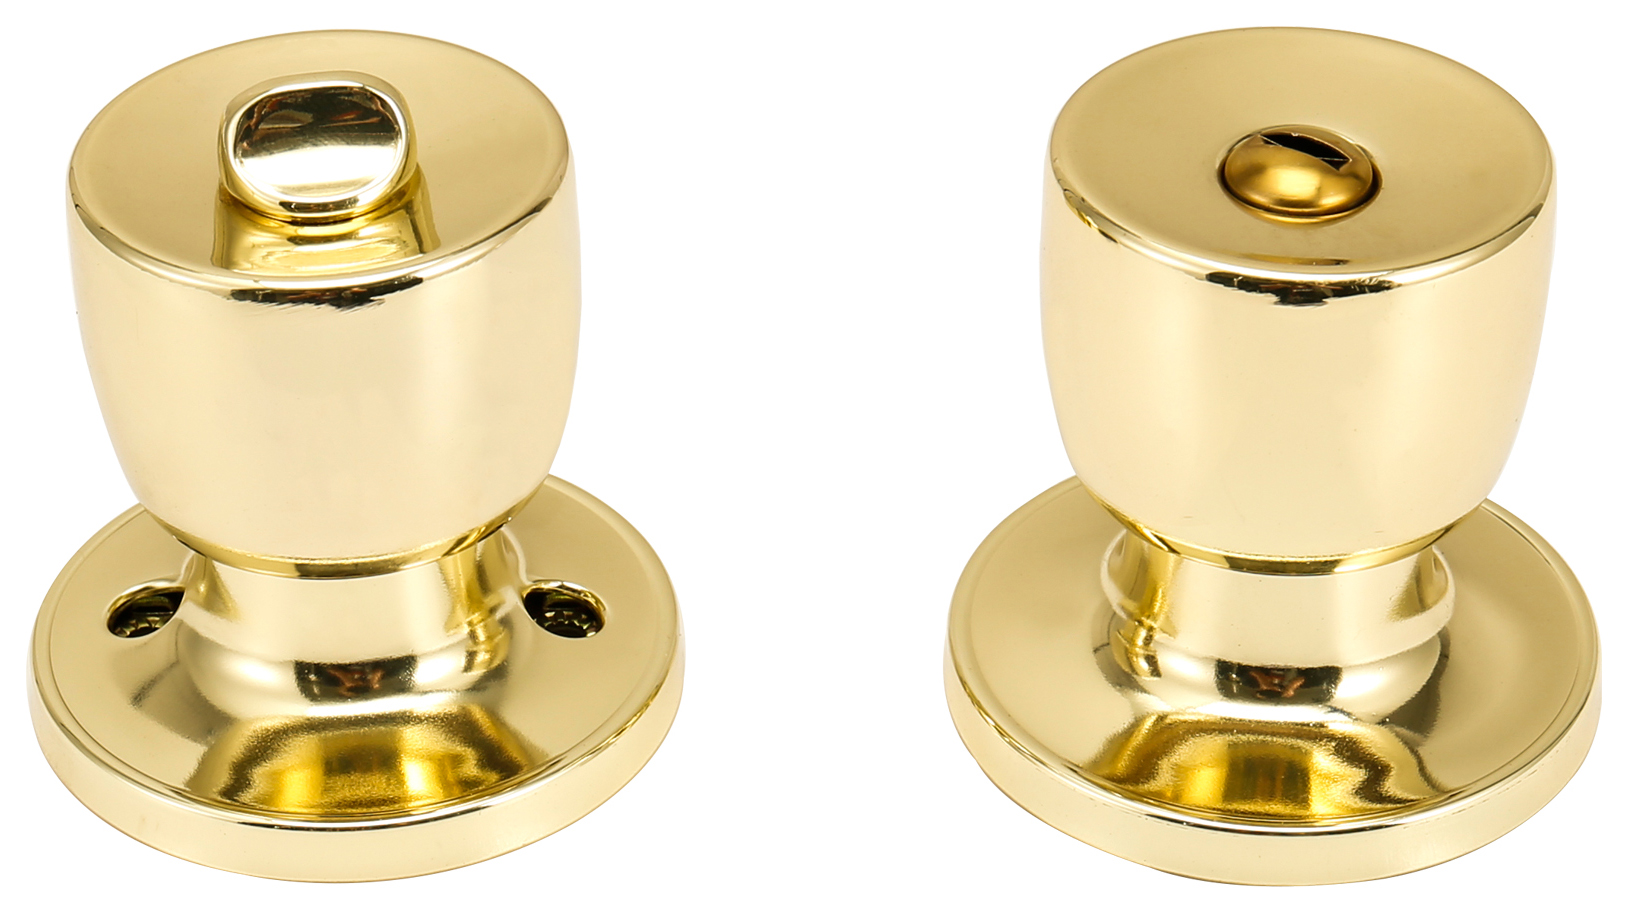 Ringed Mortice Door Knob Polished Chrome - 1 Pair